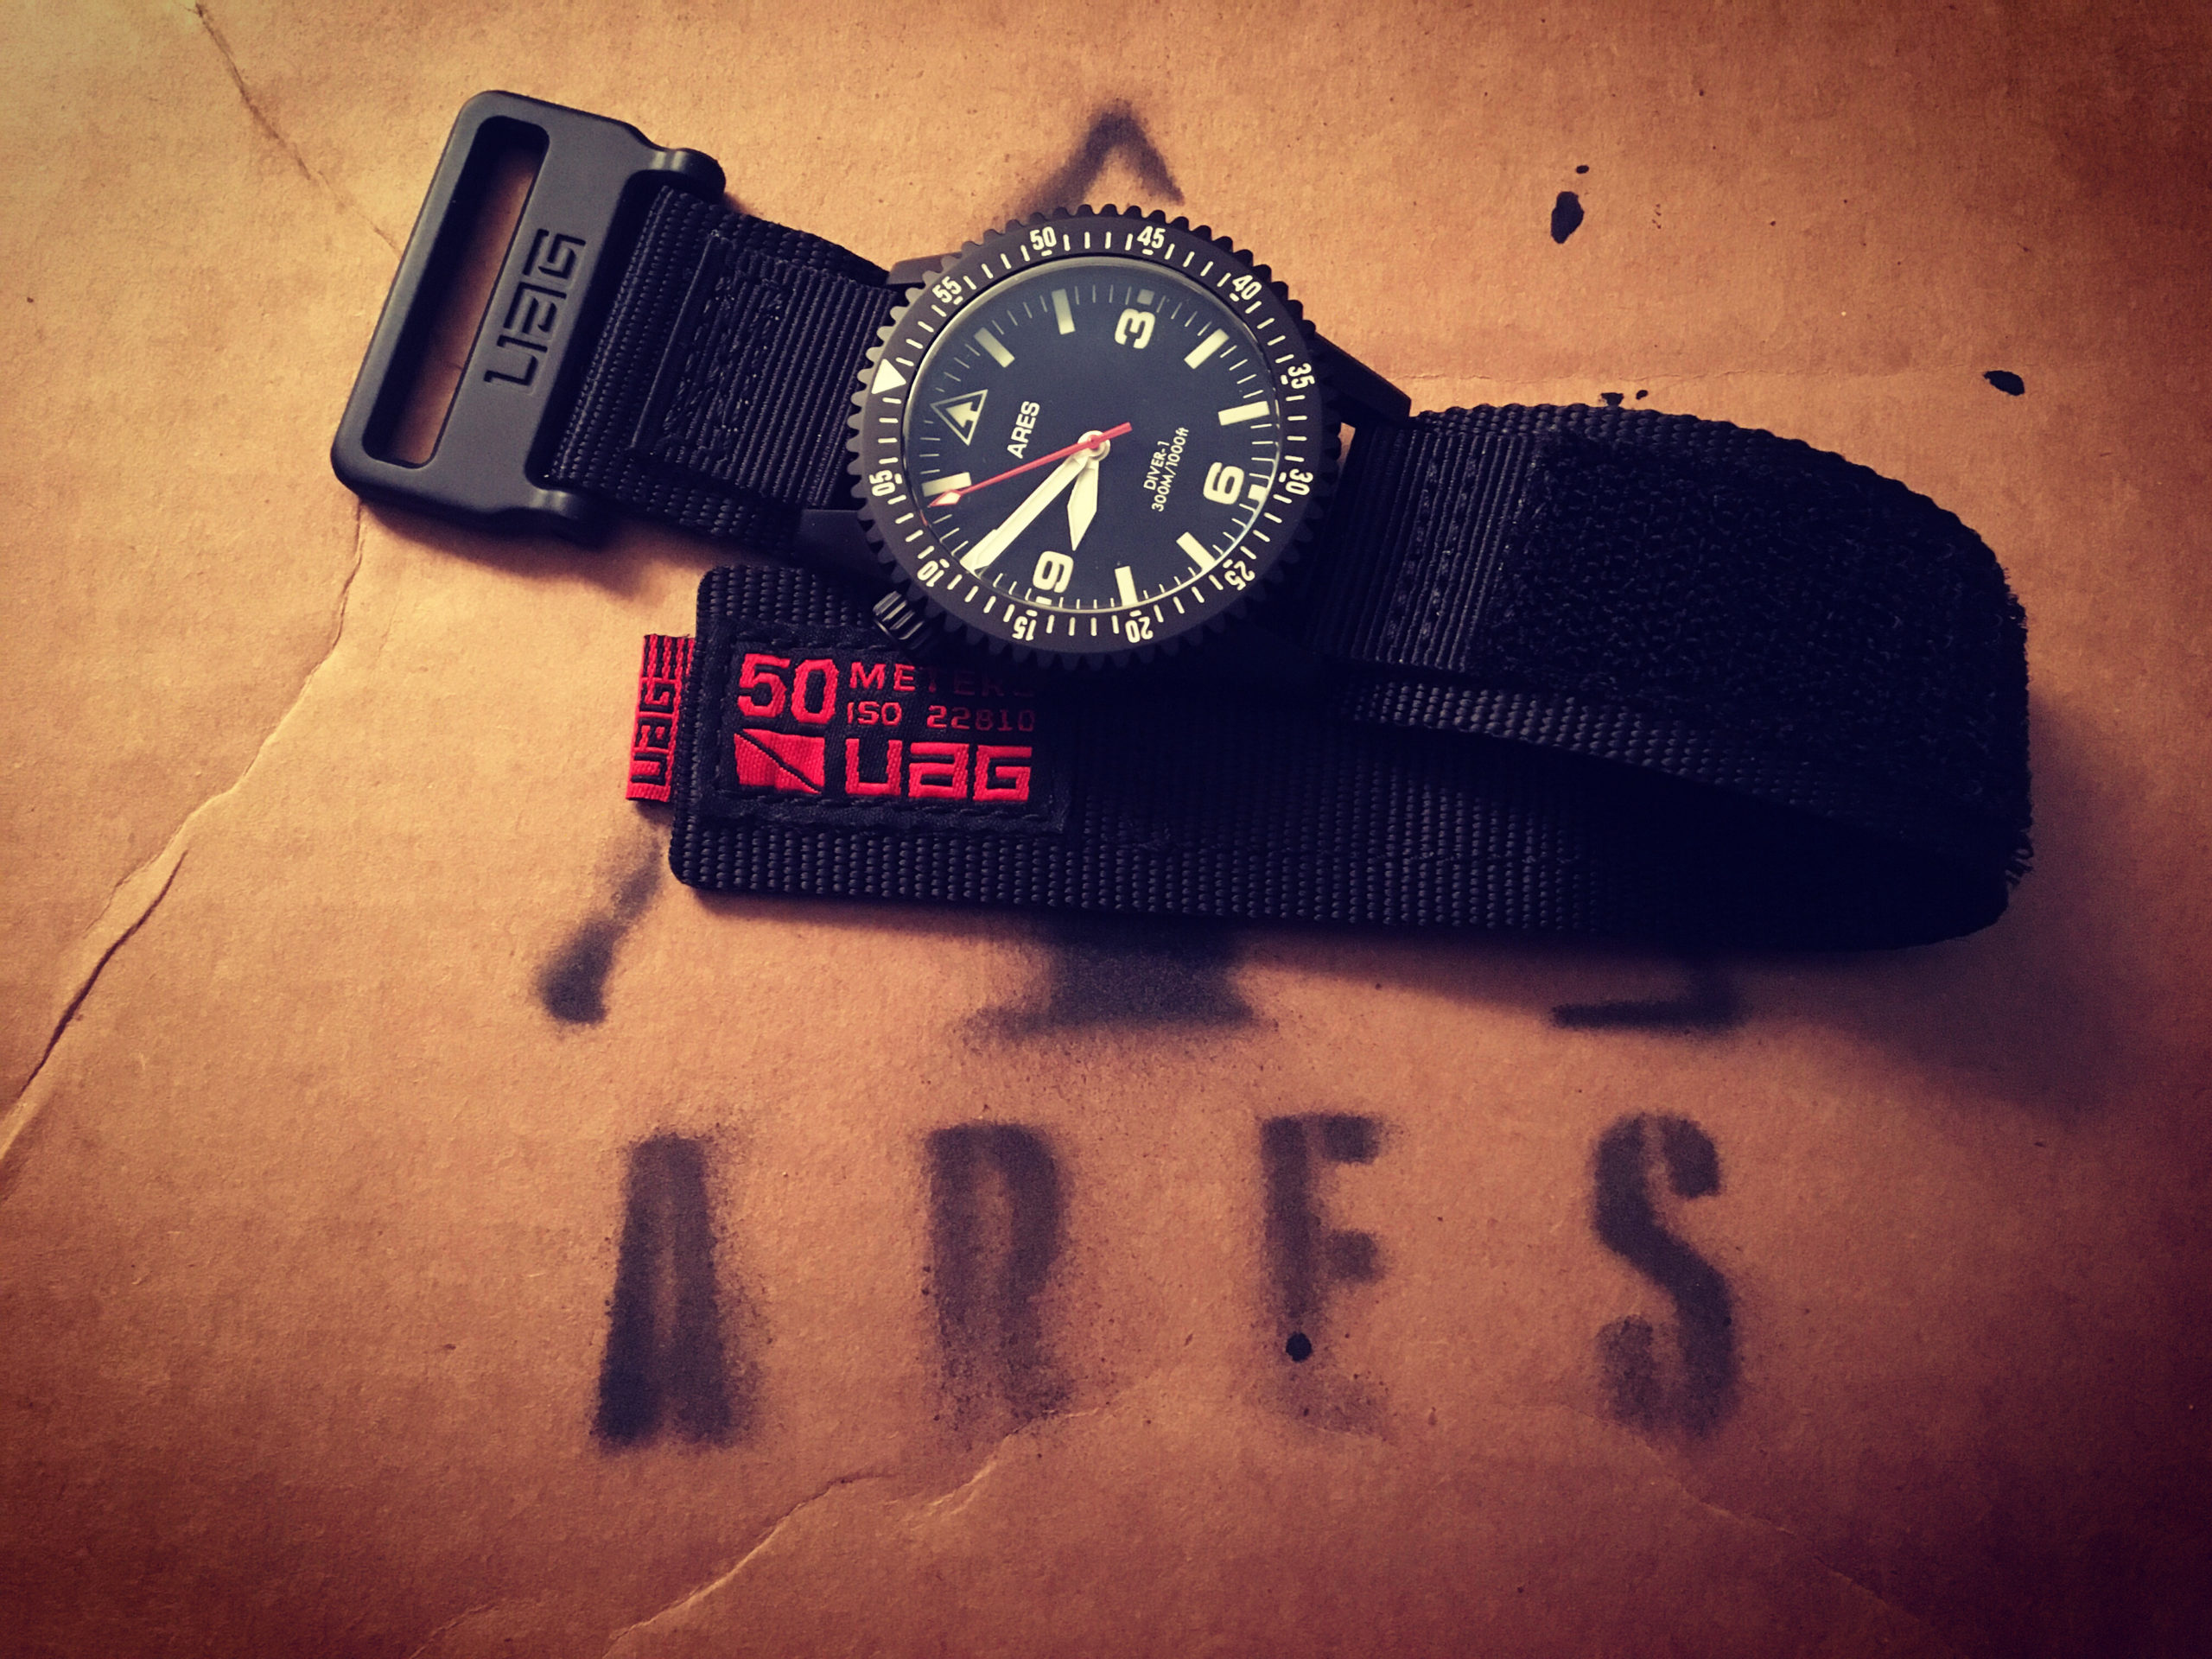 The UAG Active Watch Band is Built for Daily Adventure